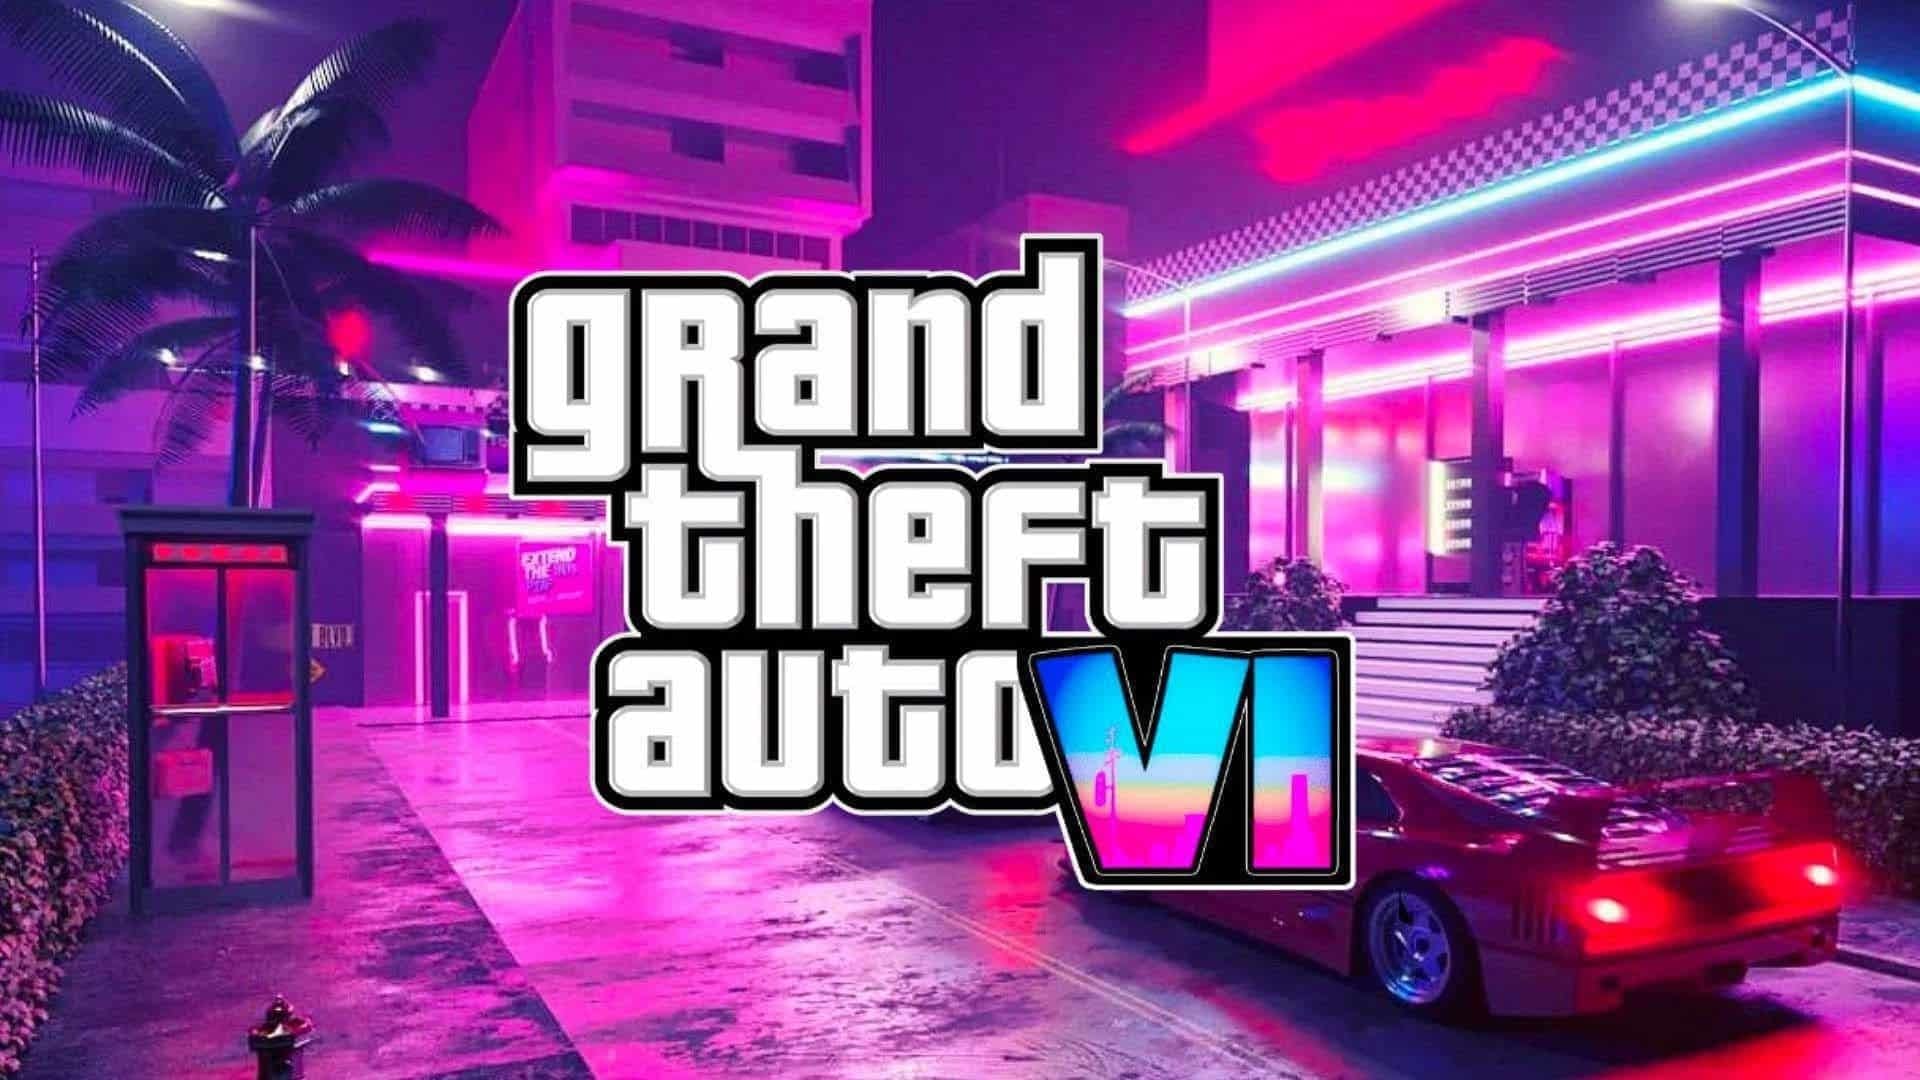 Microsoft Reports that GTA 6 Will Be Released in 2024